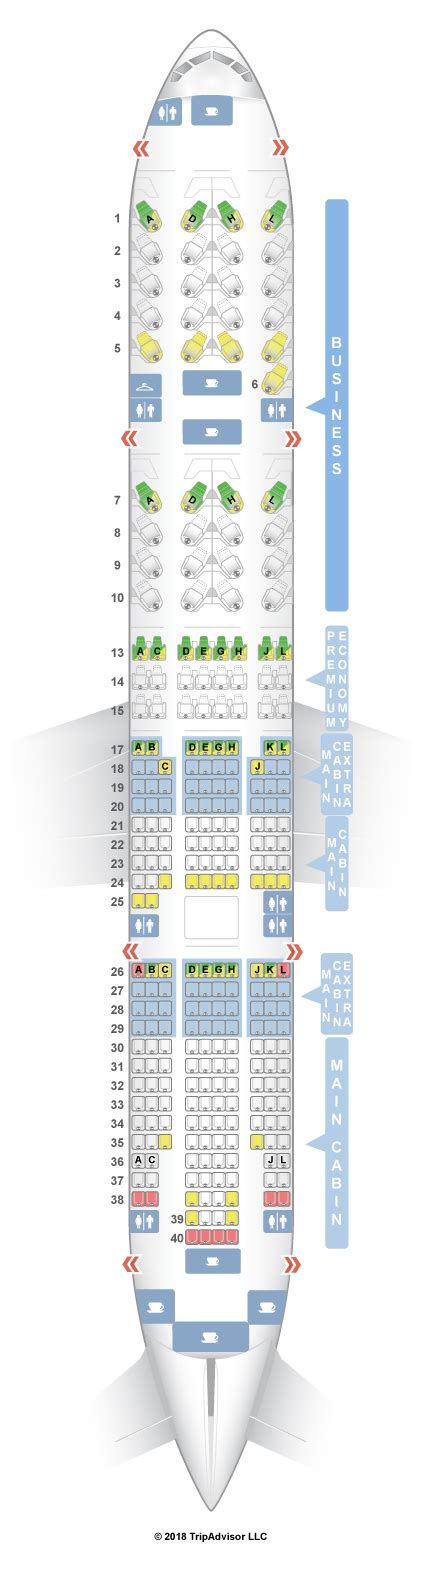 Premium seat. Crew seat. Power port. Emergency exit. Galley. Lavatory. Closet. Bassinet. For your next Emirates flight, use this seating chart to get the most comfortable seats, legroom, and recline on ..